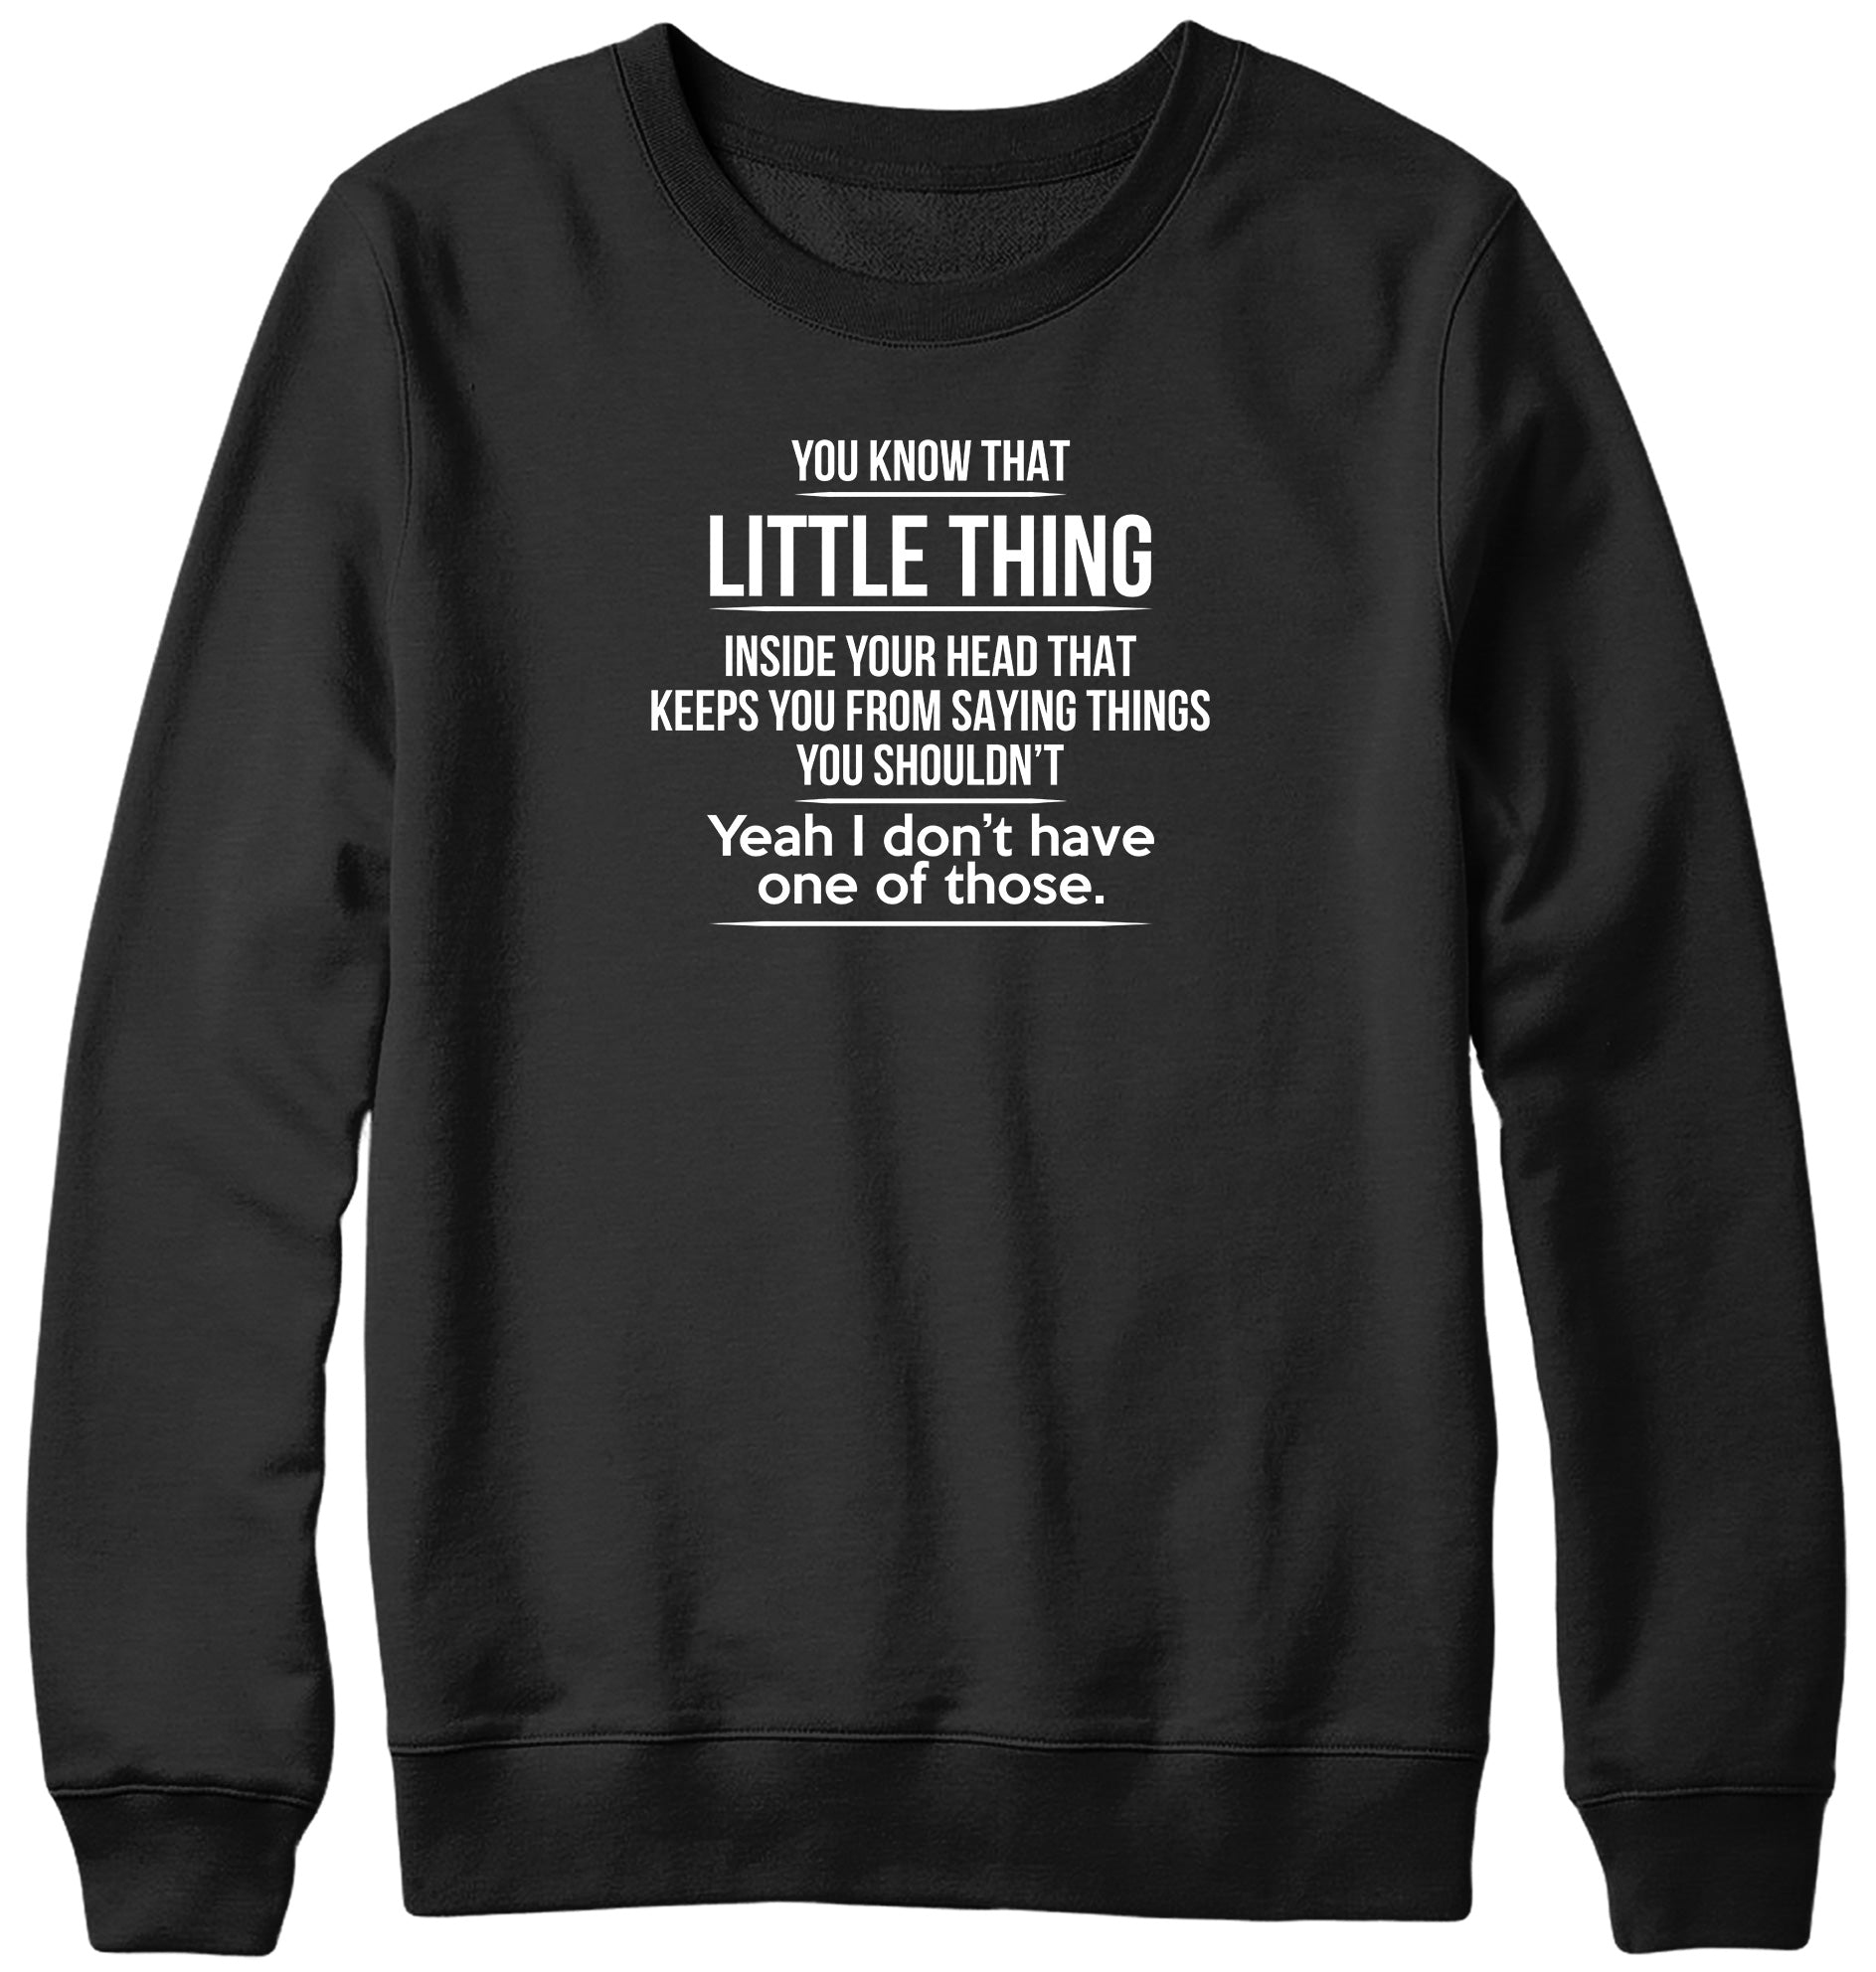 THAT LITTLE THING INSIDE YOUR HEAD THAT KEEPS YOU FROM SAYING THINGS YOU SHOULDN'T MENS LADIES WOMENS UNISEX SWEATSHIRT SWEATER